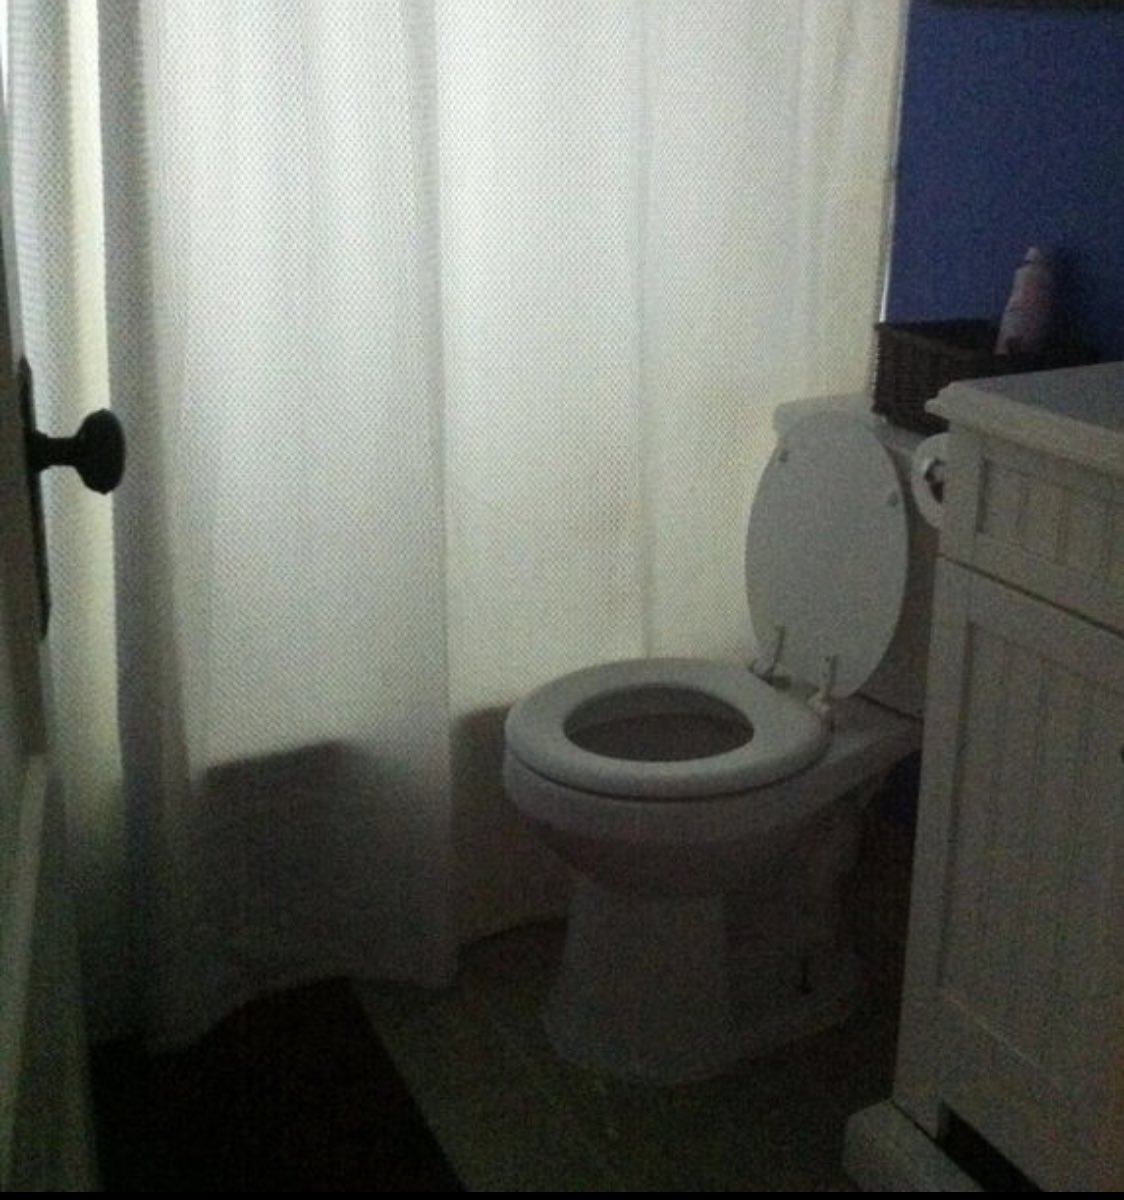 What if I just start this as a thread of cursed images I find while trawling zillow?